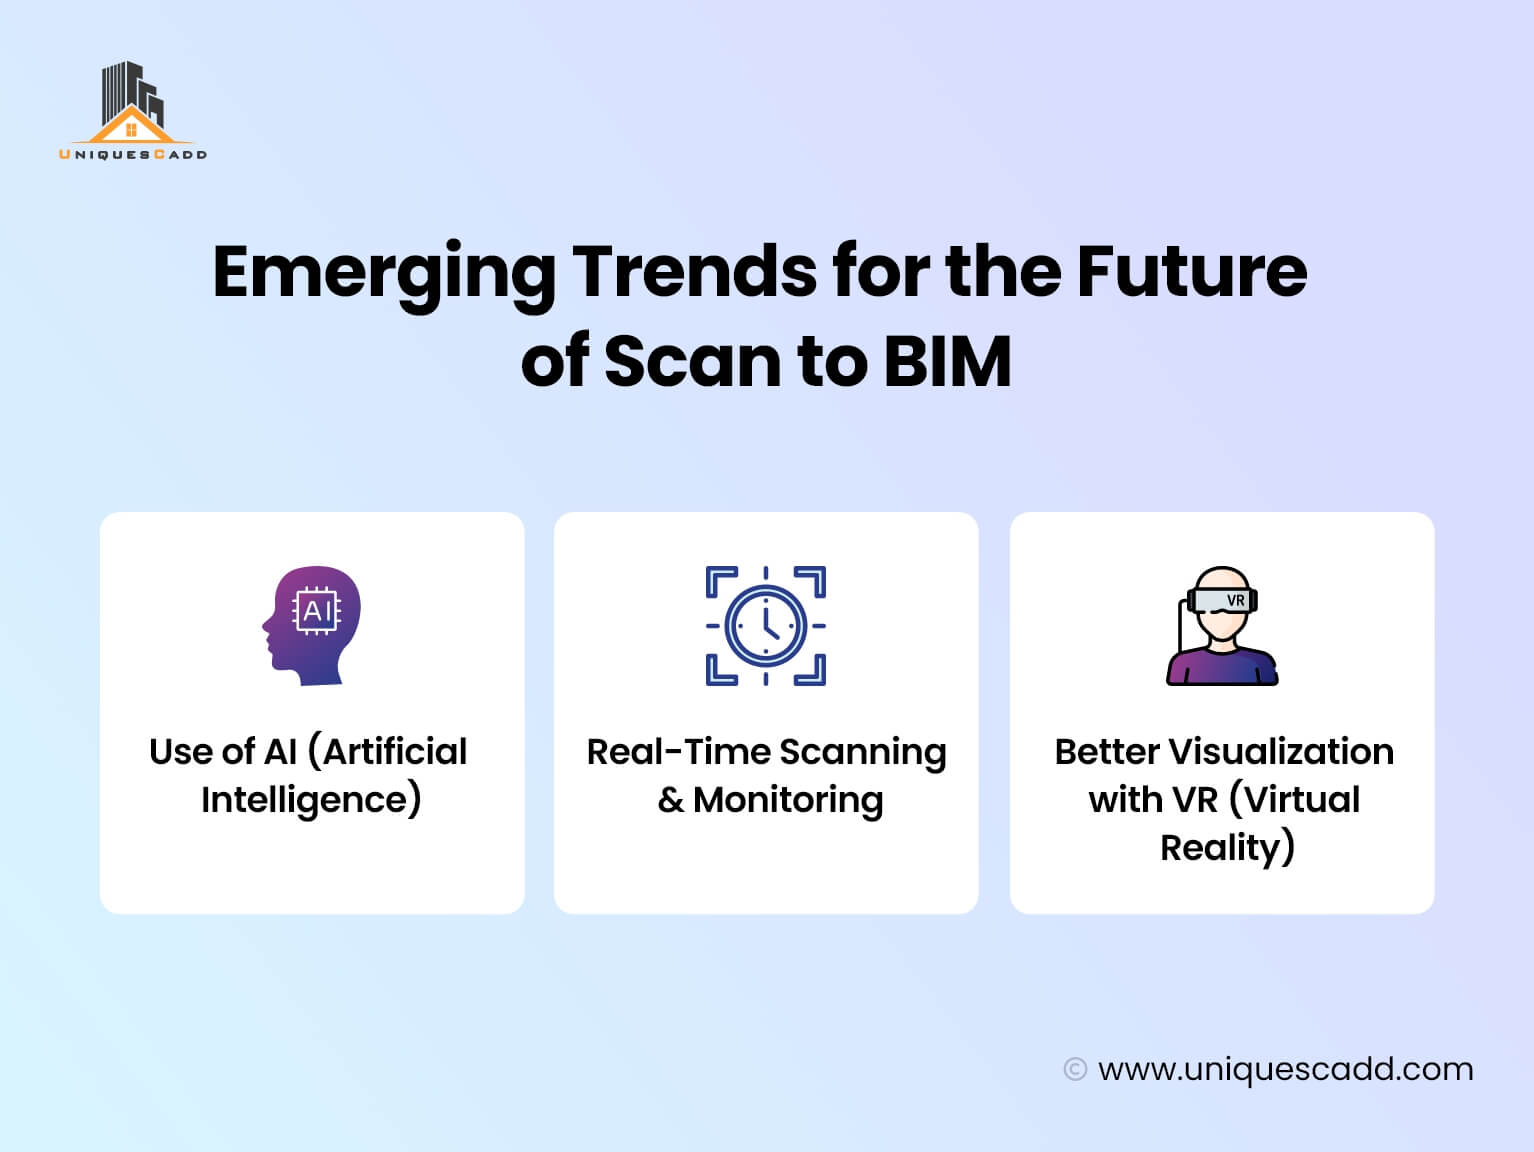 Emerging Trends for the Future of Scan to BIM